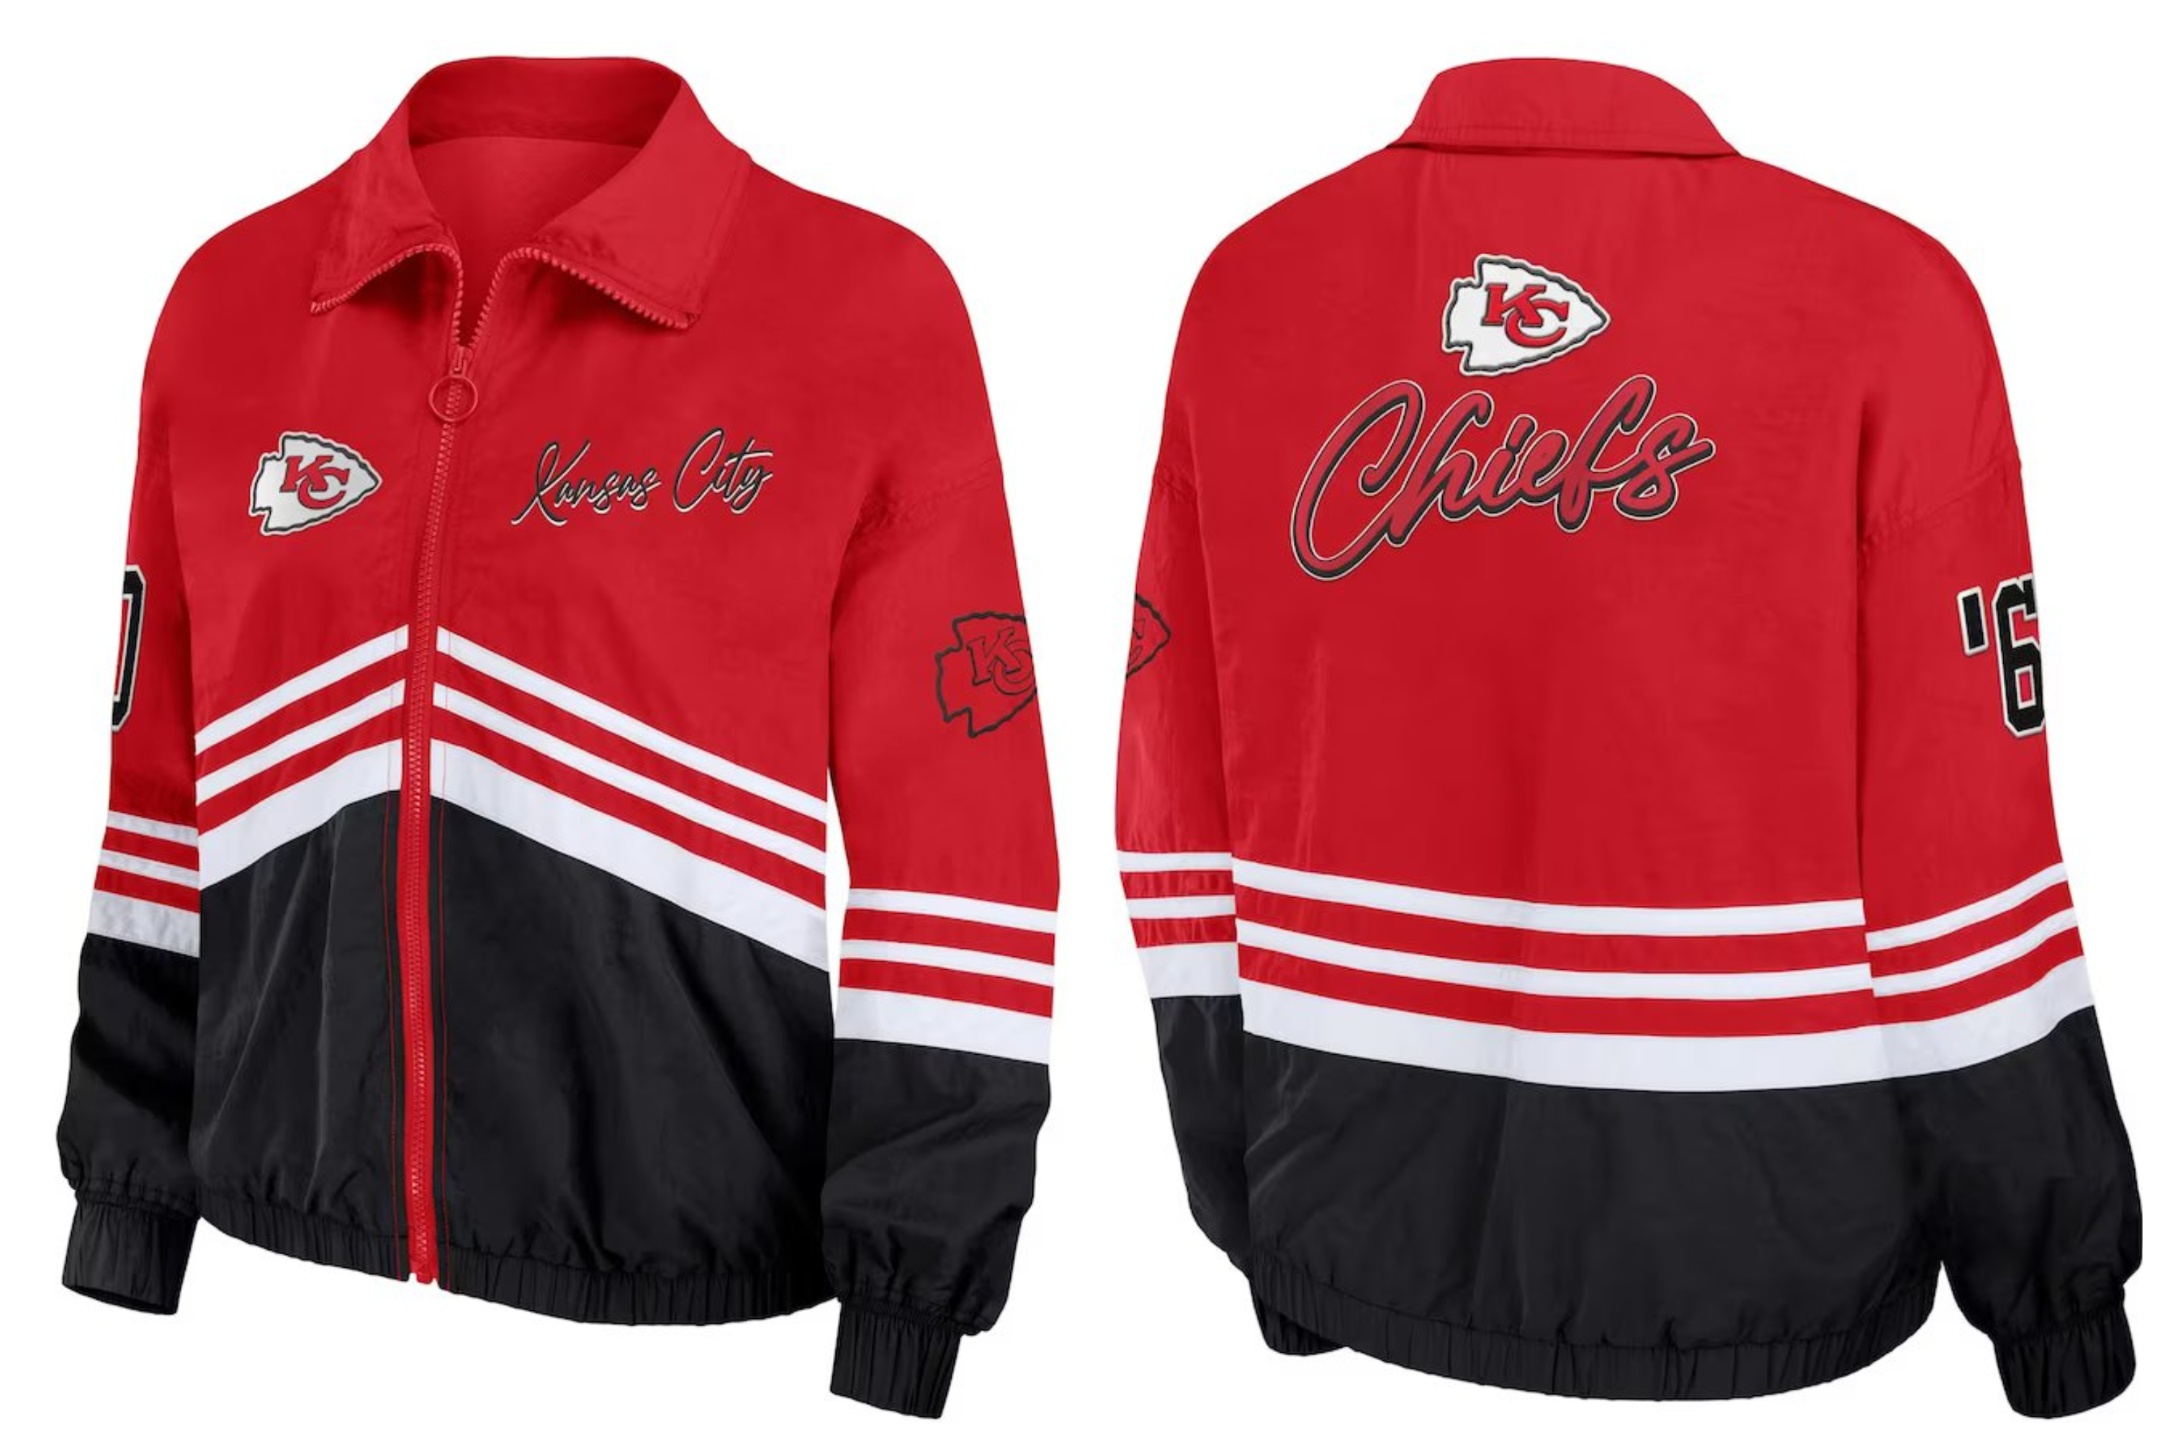 Taylor Swift's Chiefs Varsity Jacket Is Available to Purchase